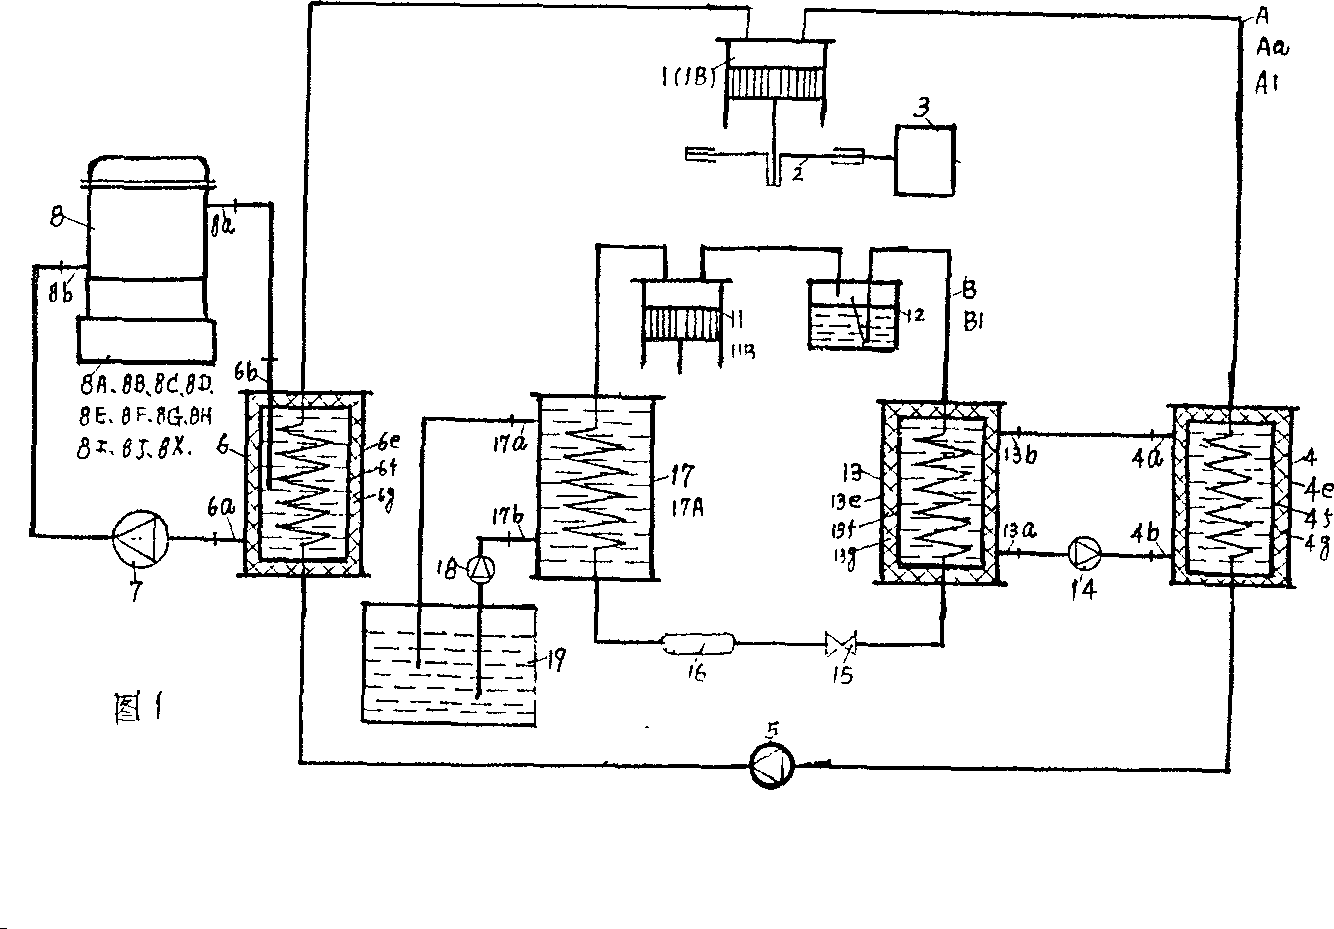 Composite thermodynamic engine of power circulation system and refrigerating circulation system